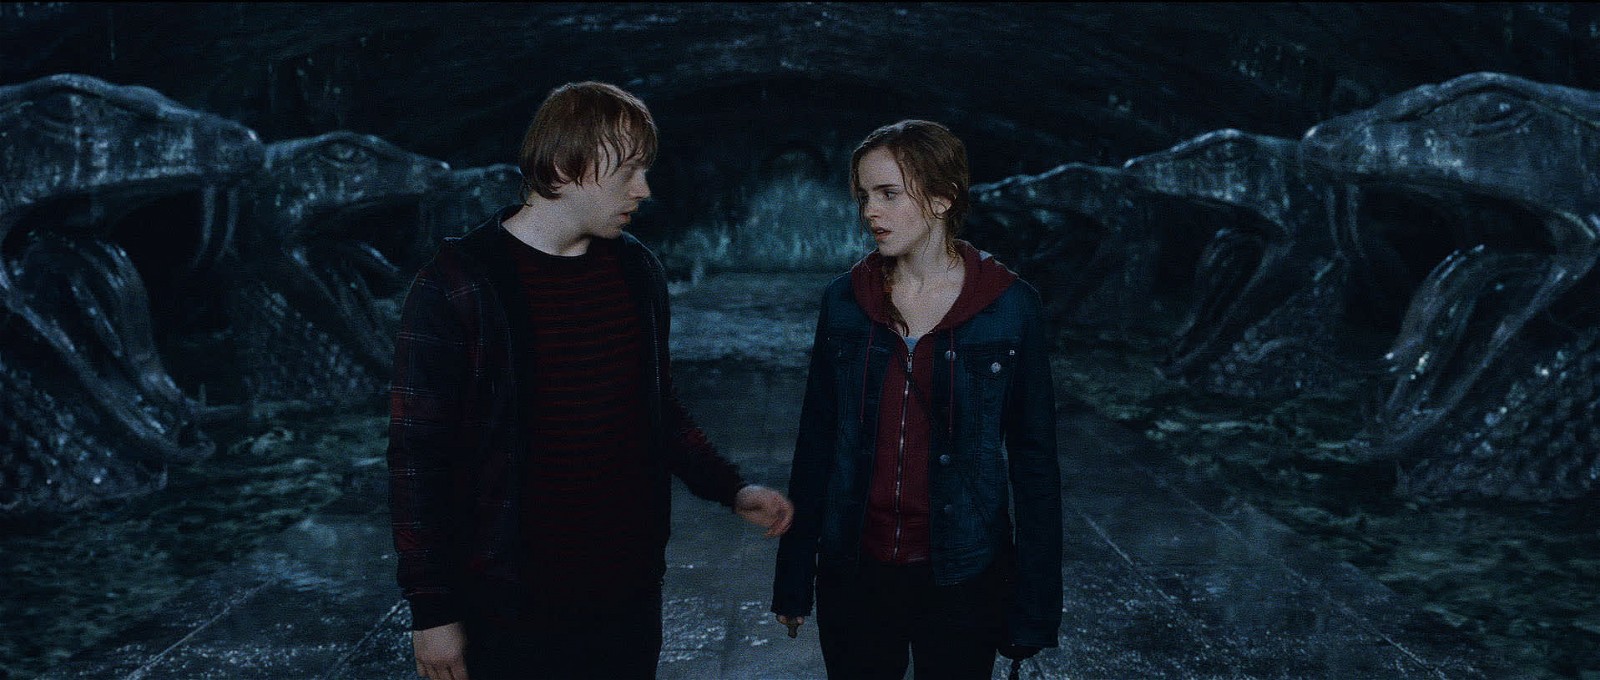 Ron and Hermione in the Chamber of Secrets in Deathly Hallows – Part 2